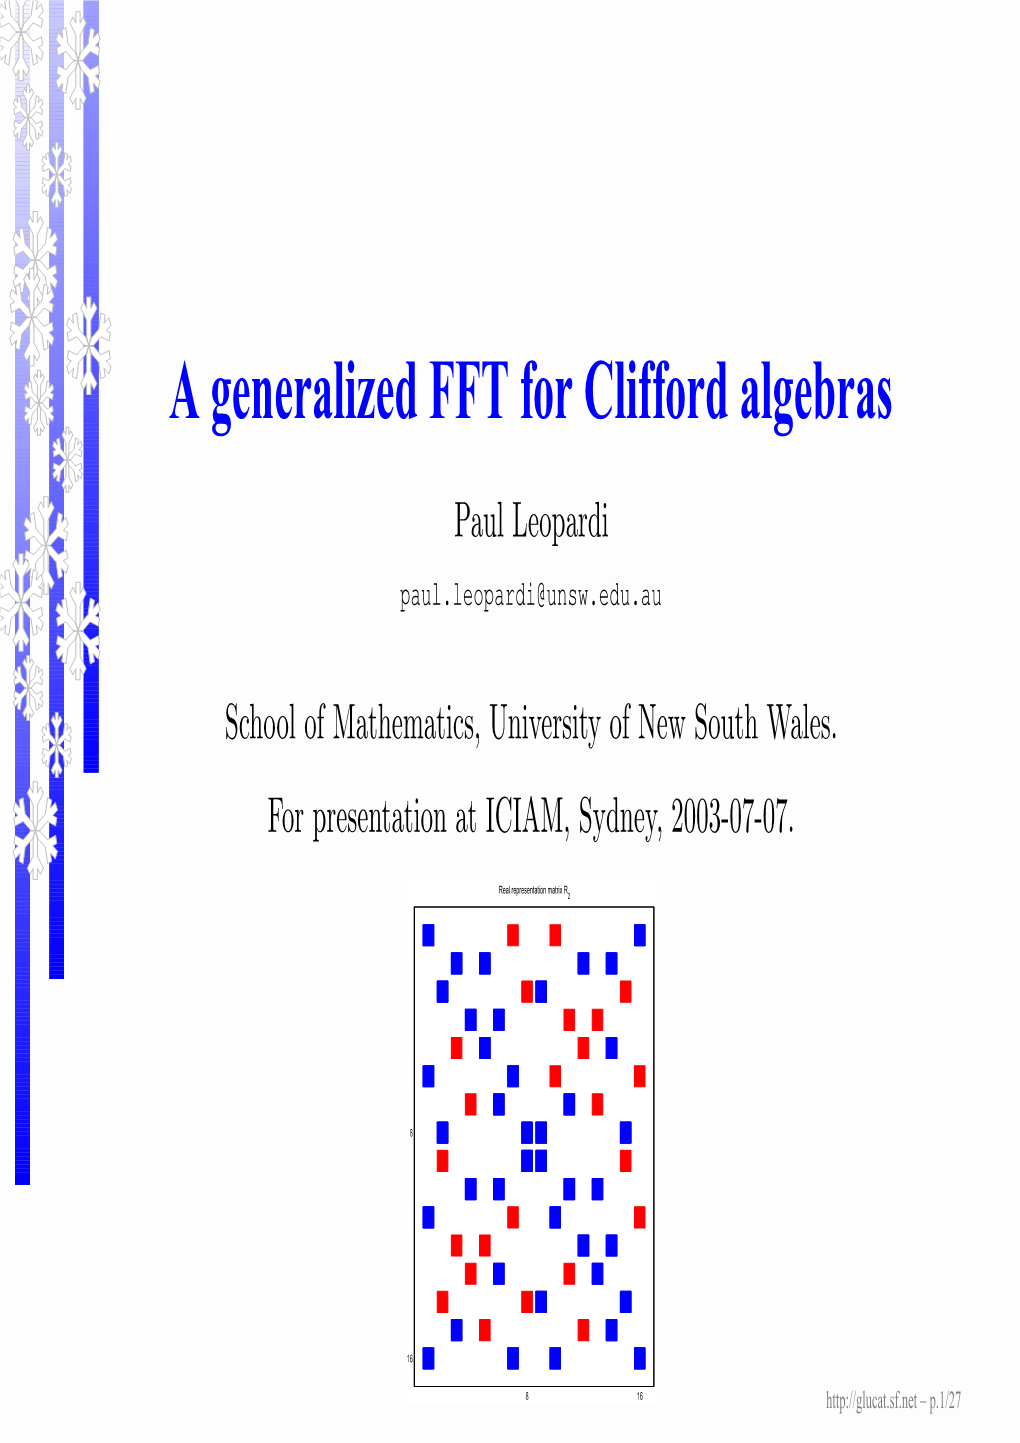 A Generalized FFT for Clifford Algebras, 2003